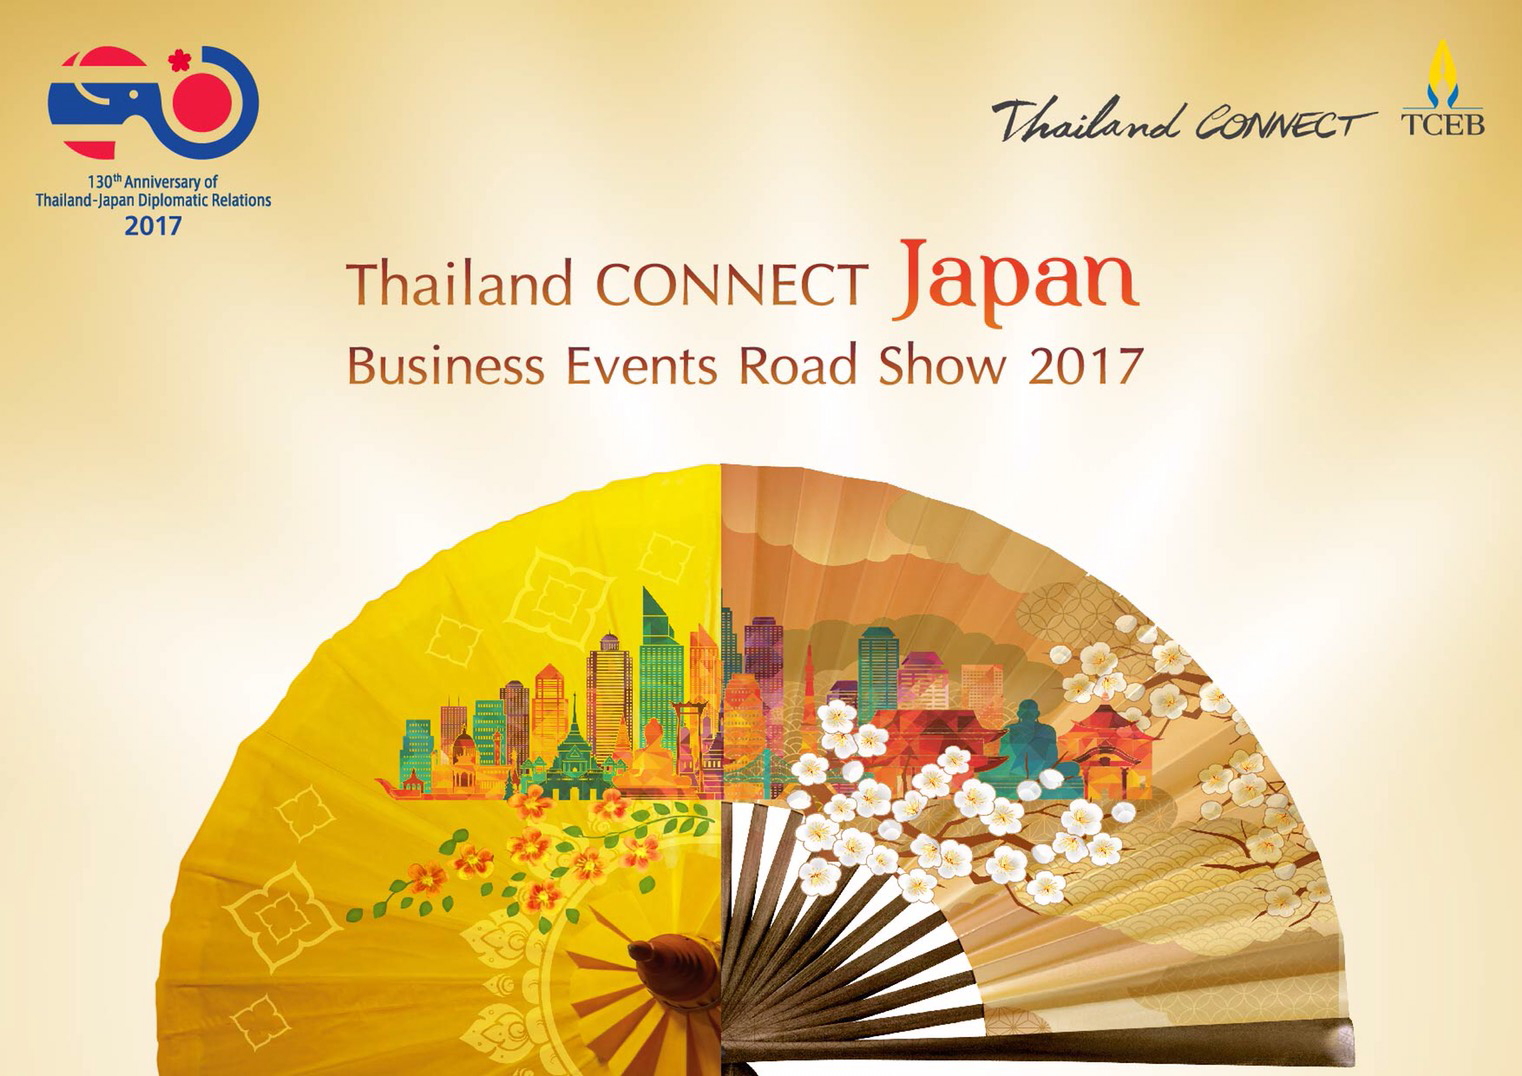 Thailand Connect: Japan Business Events Road Show 2017 will take place in Tokyo 2-3 March 2017